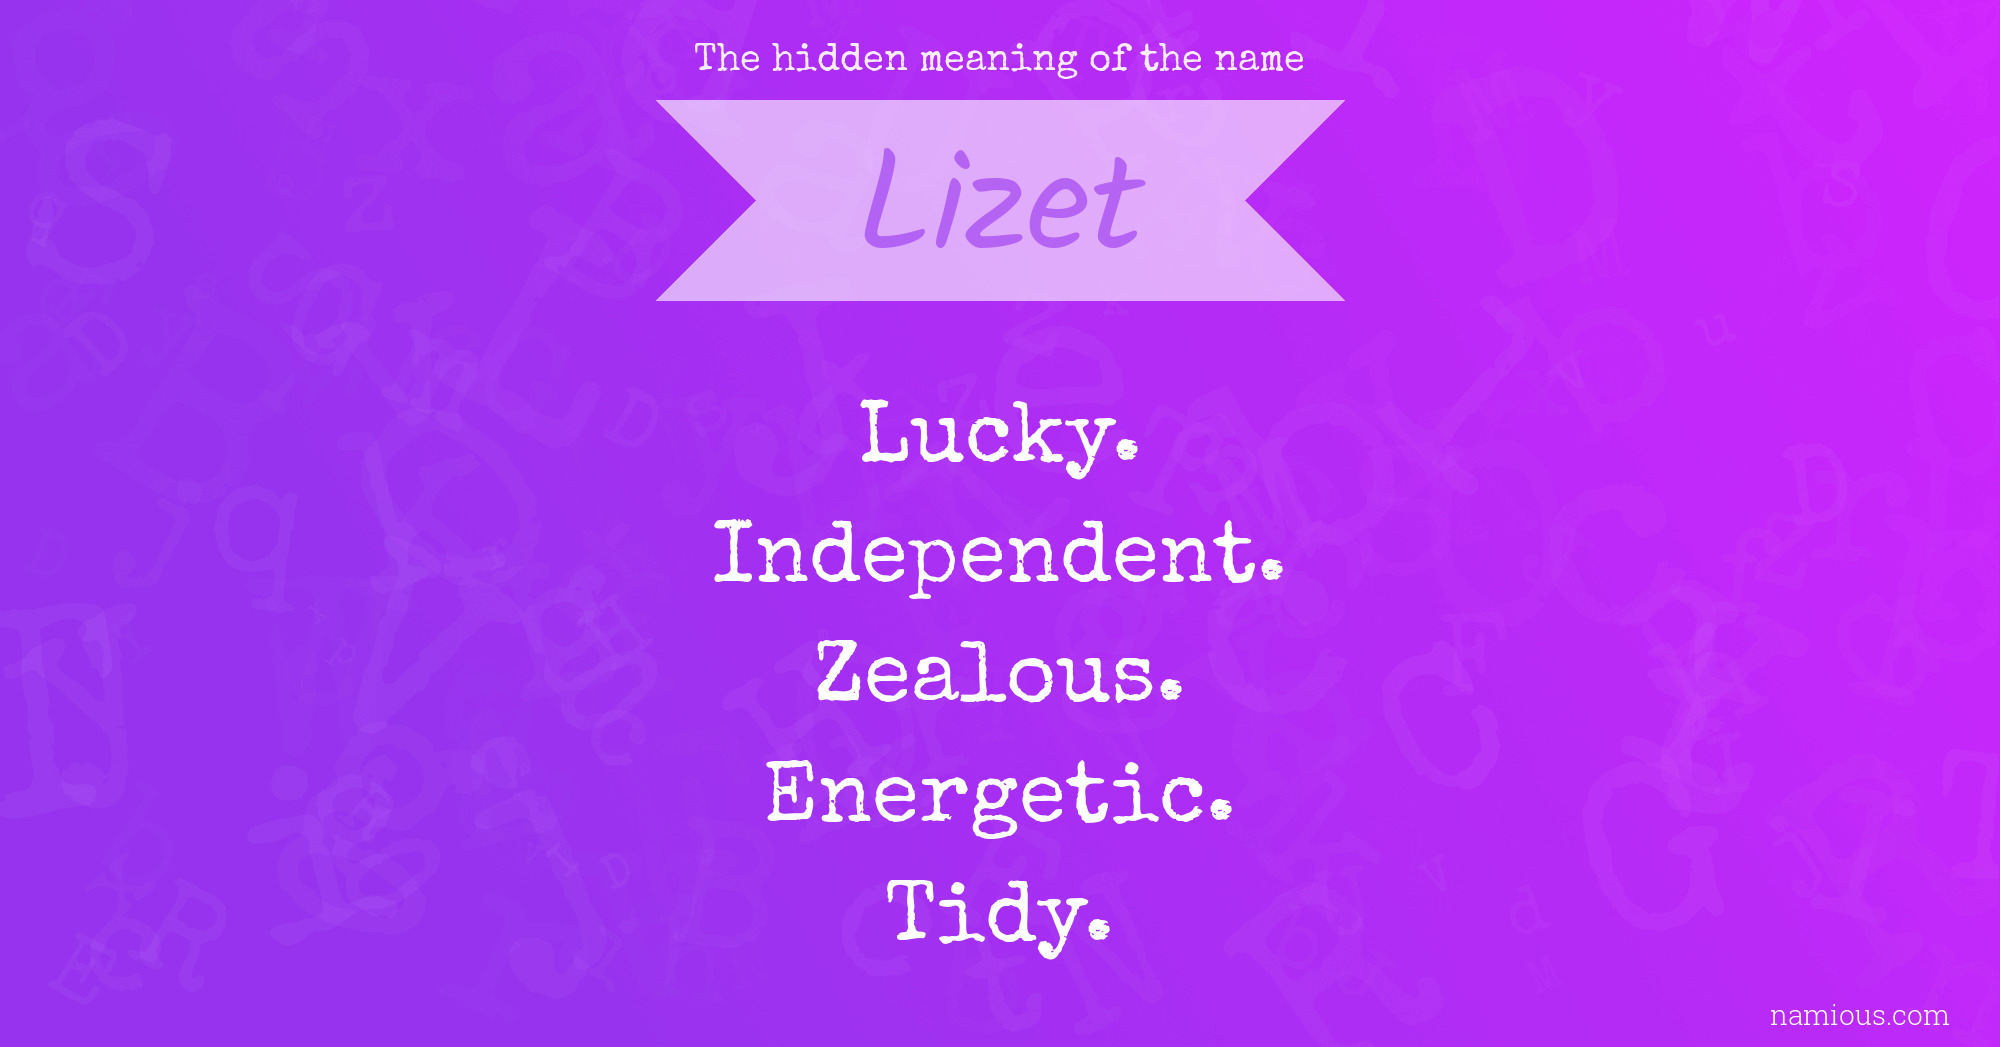 The hidden meaning of the name Lizet